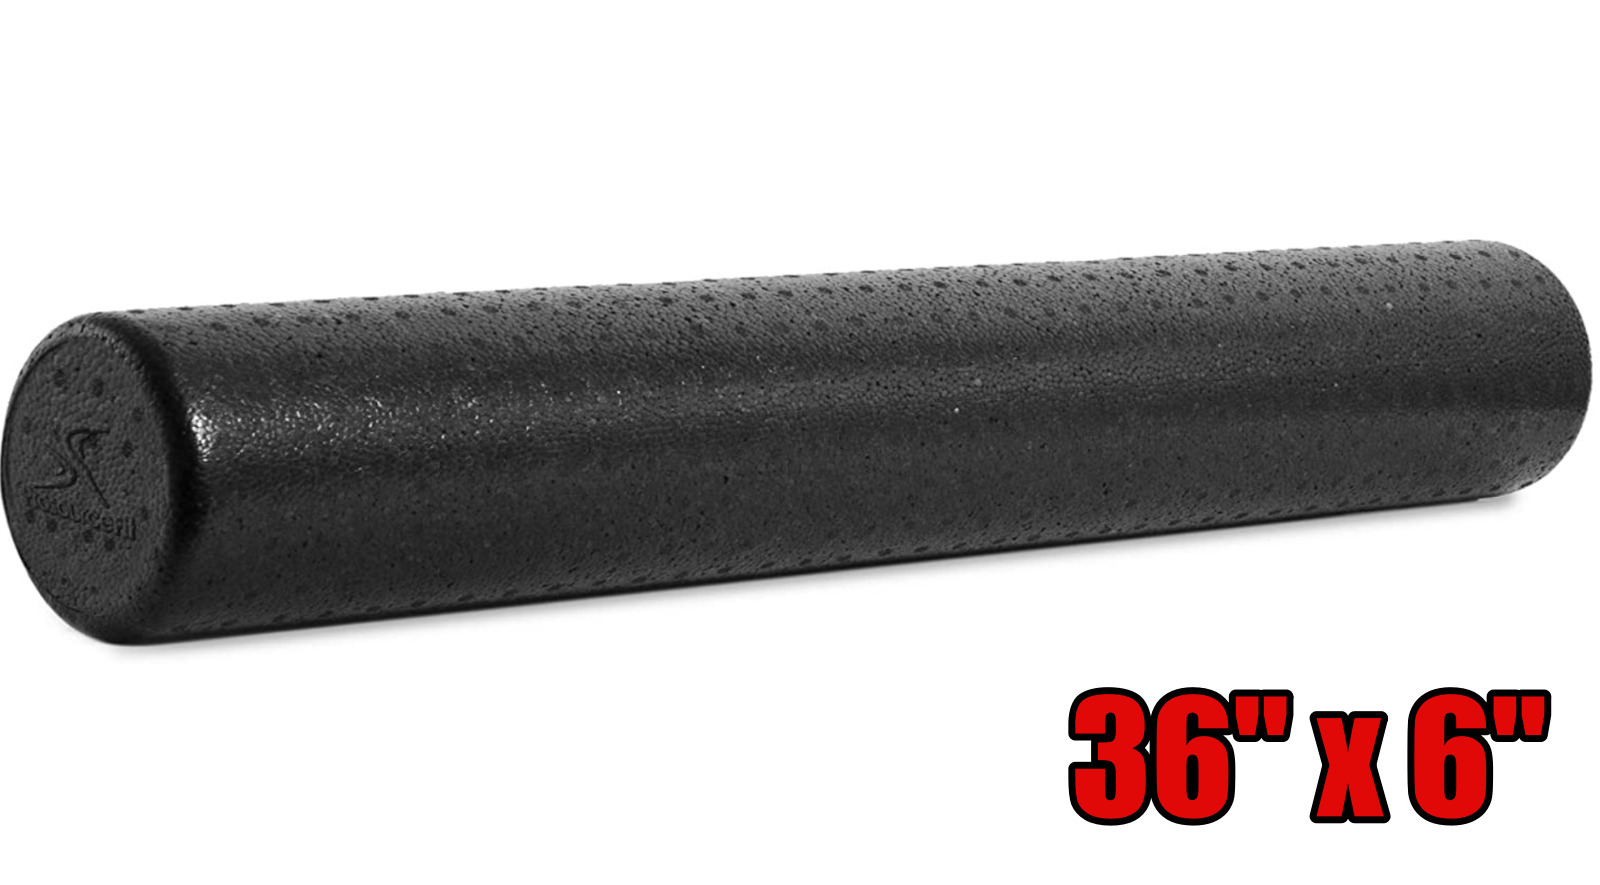 Foam Roller 36X6 High Density Body Exercise Massage Yoga Back Pain Therapy Bla